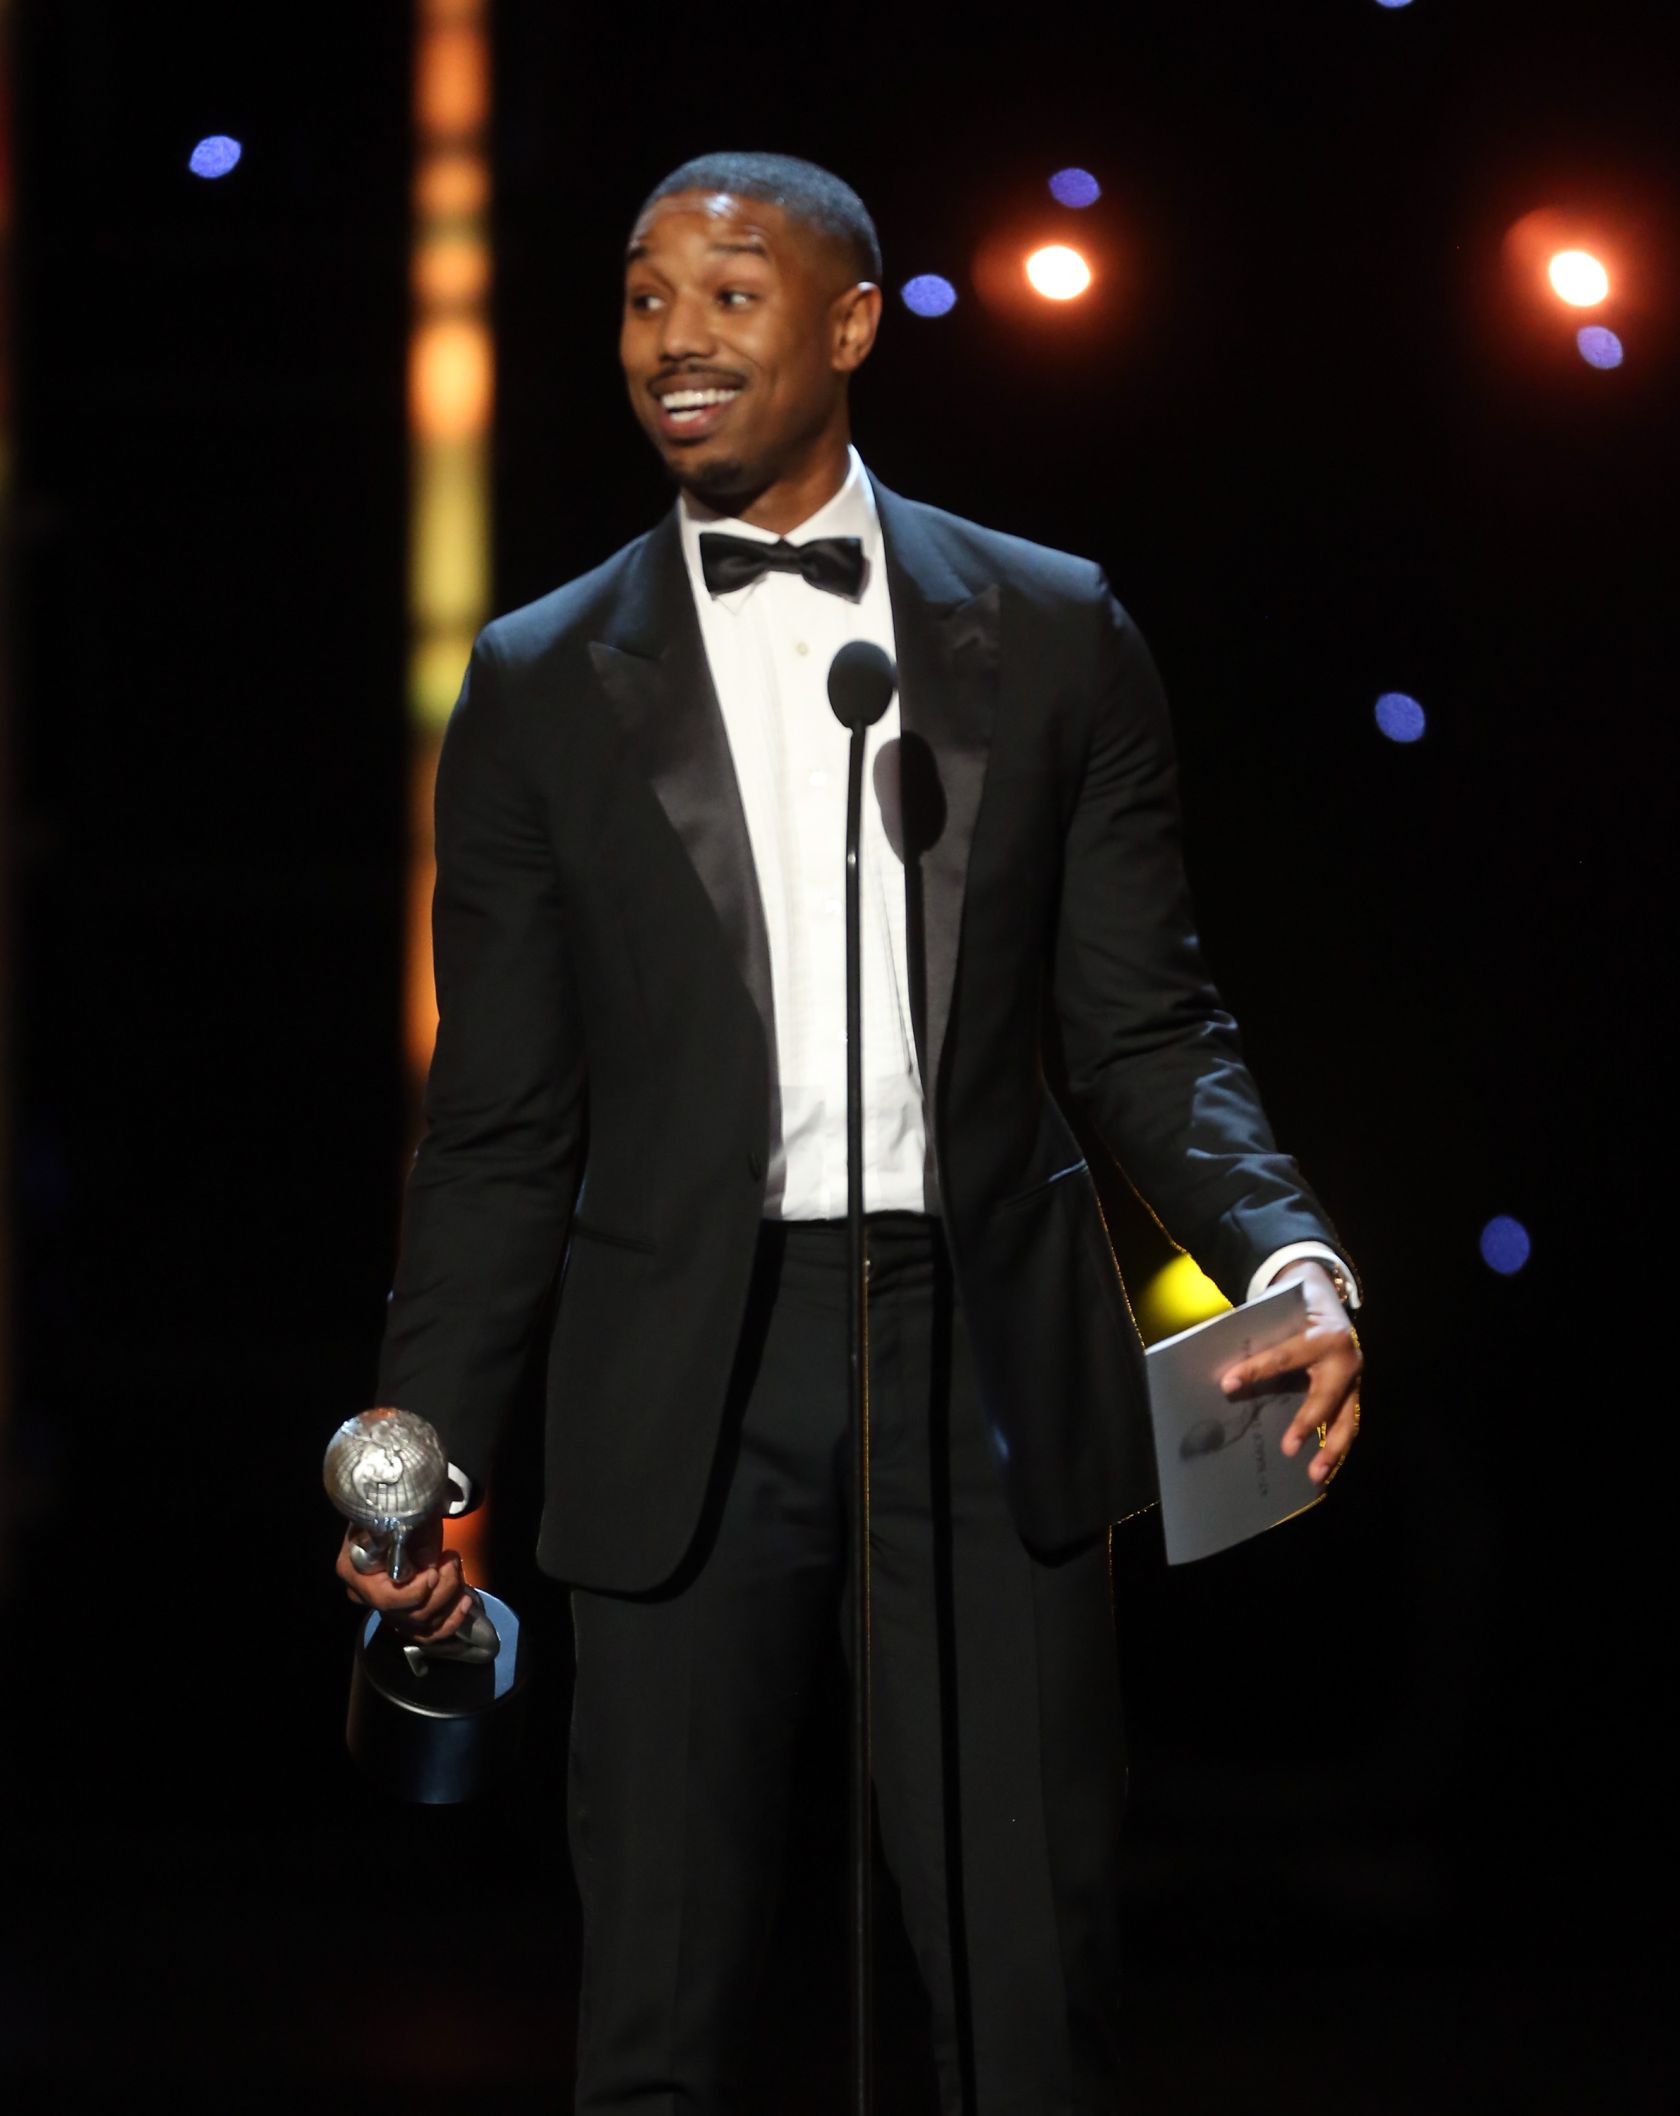 47th NAACP Image Awards Presented By TV One - Show